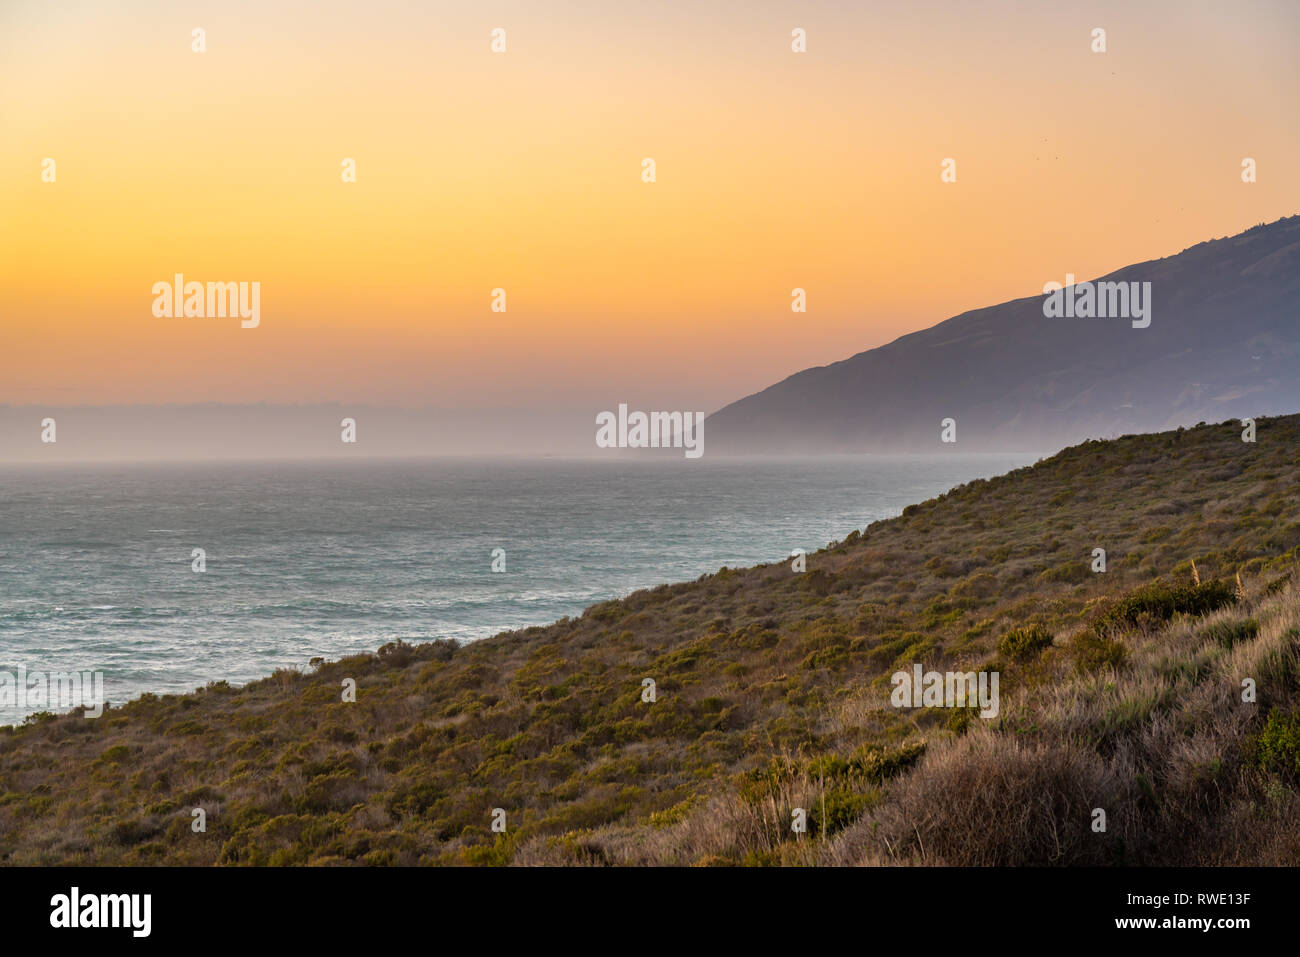 Big Sur, California - The natural Pacific Coastline at sunset. Stock Photo